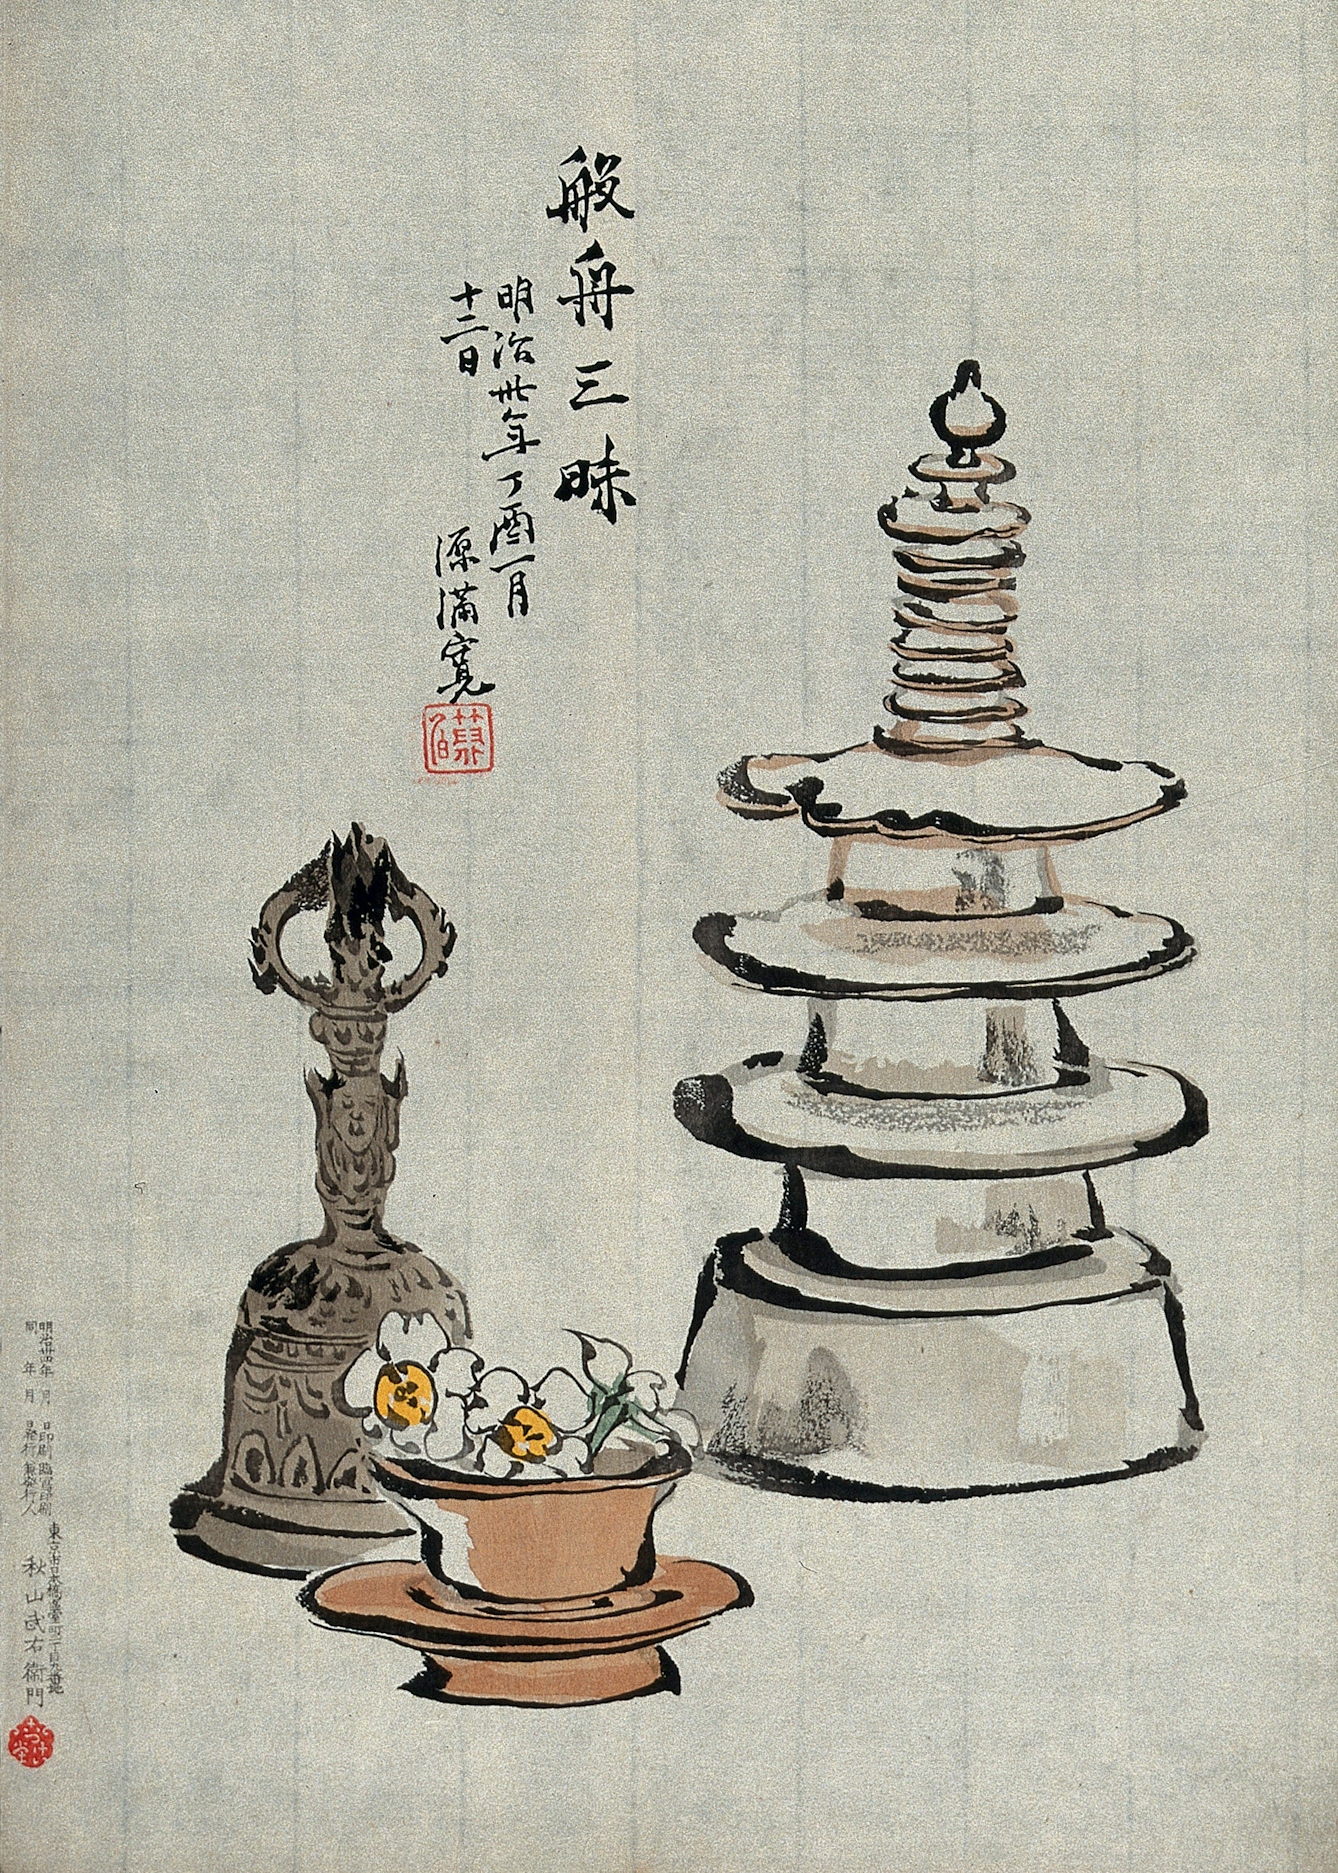 Woodcut image of three objects of Buddhist contemplation: a miniature stupa, a buddhist hand bell and a bowl with blossoms.